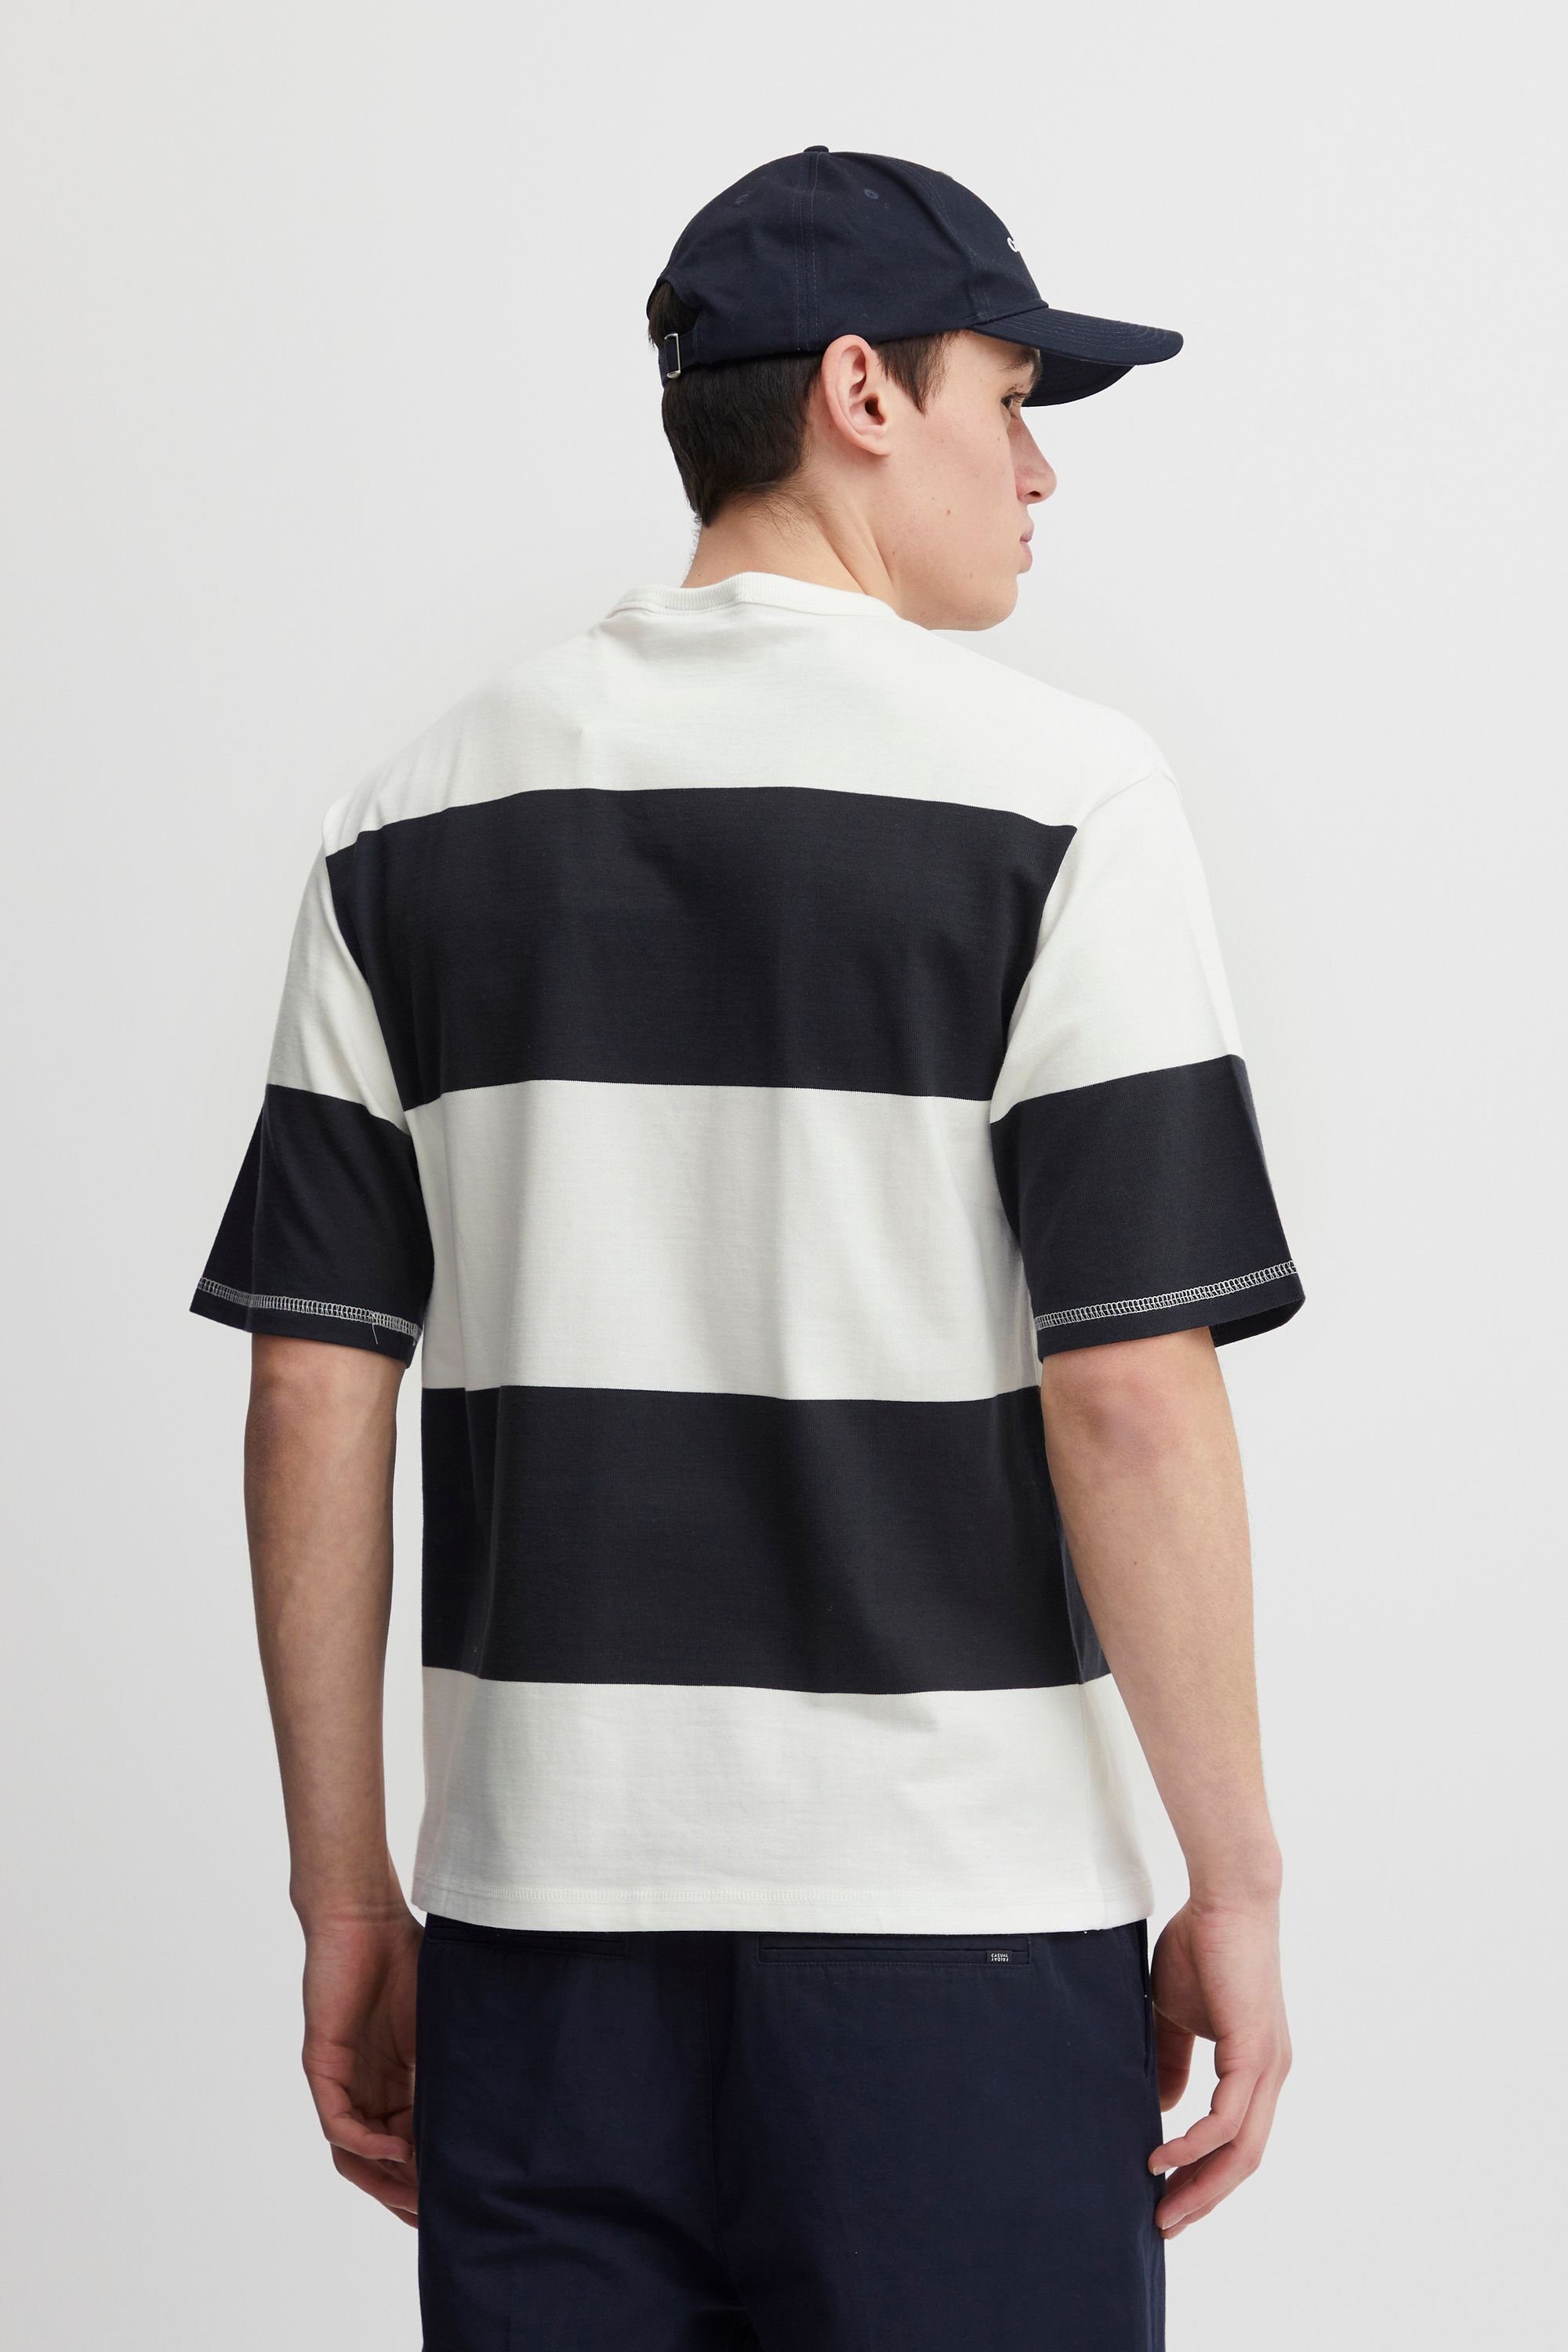 Casual Friday CFTue 20504714 striped T-Shirt wide - tee